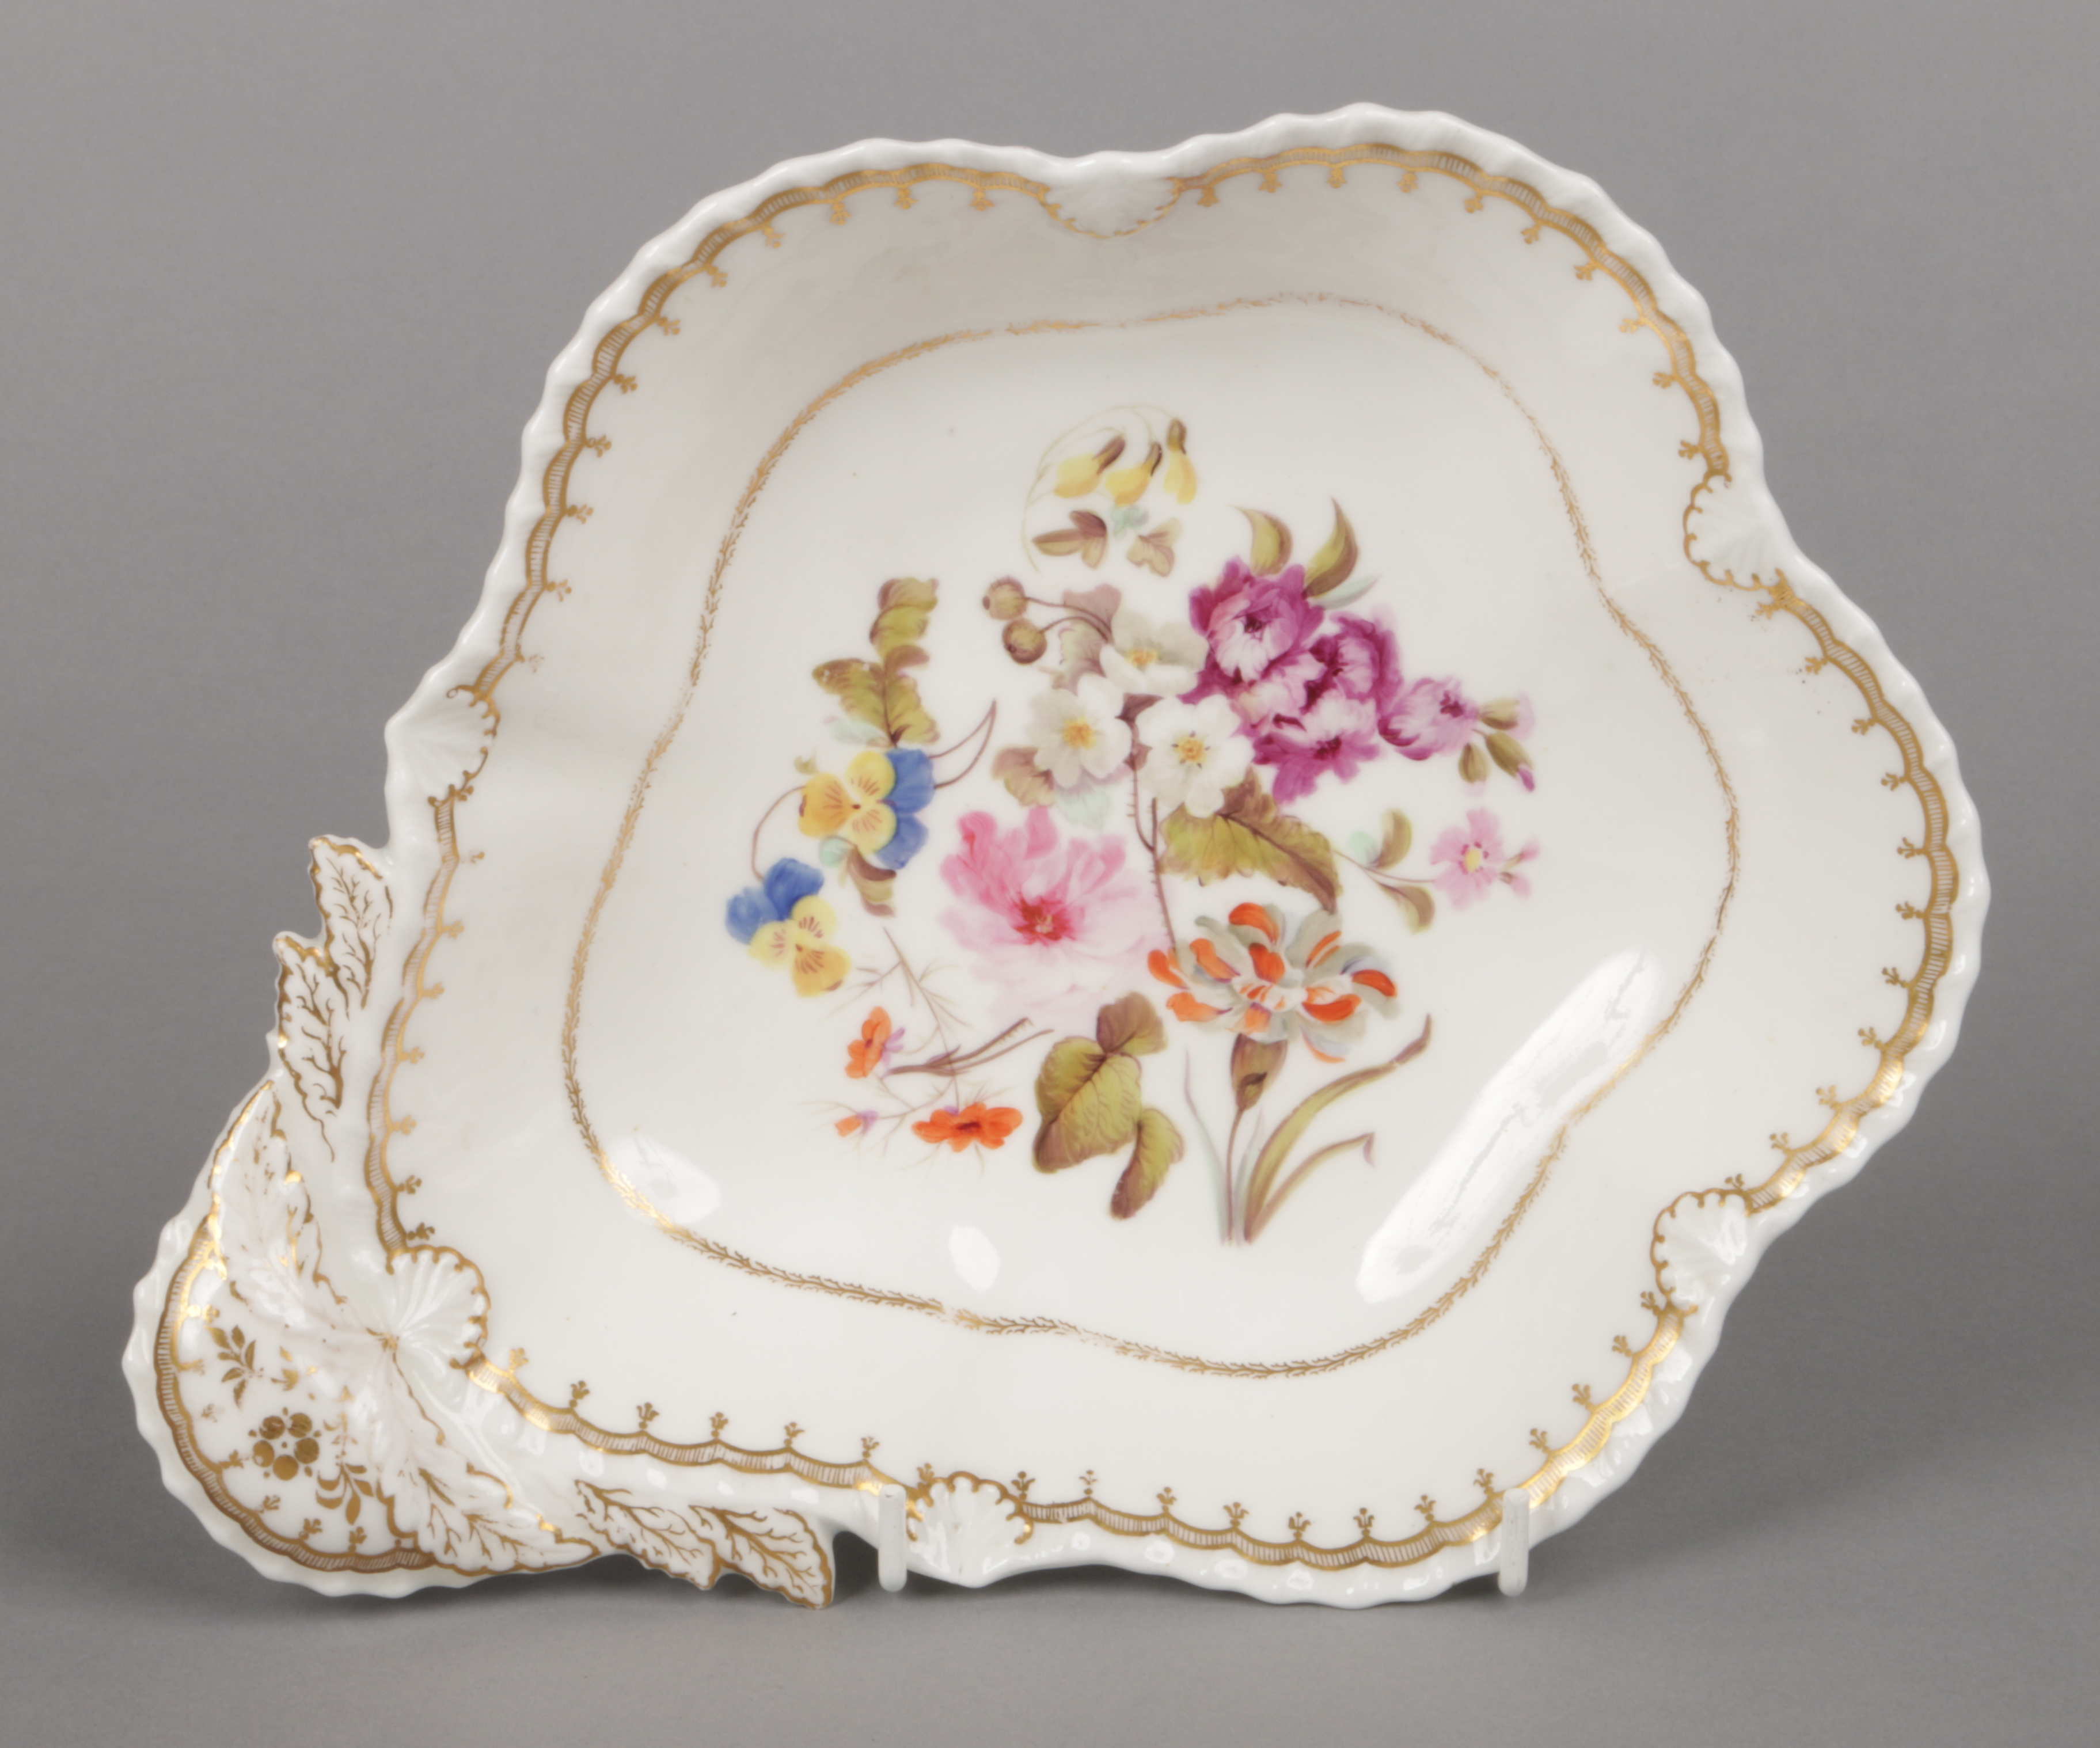 A Rockingham dessert dish with anthemion and gadroon moulding. With gilt borders and delicately